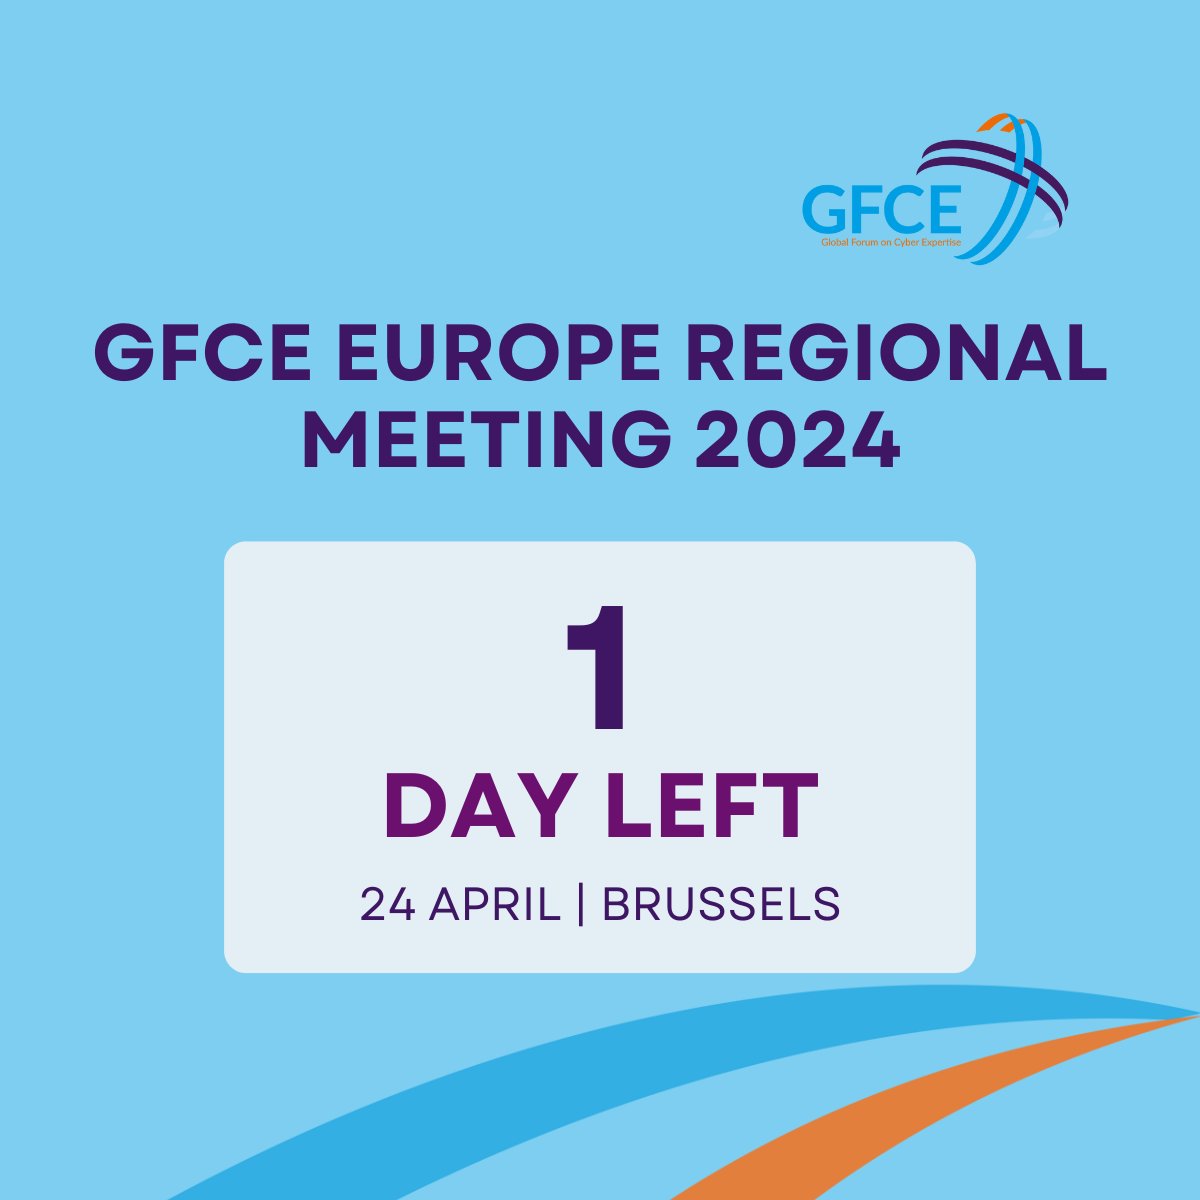 🚨 The #GFCE Europe Regional Meeting 2024 will take place tomorrow! Join regional experts for vital discussions on the future of cyber capacity building in Europe at the GFCE Regional Meeting in Brussels, starting at 2:00 PM tomorrow. Check the latest program, speakers, and key